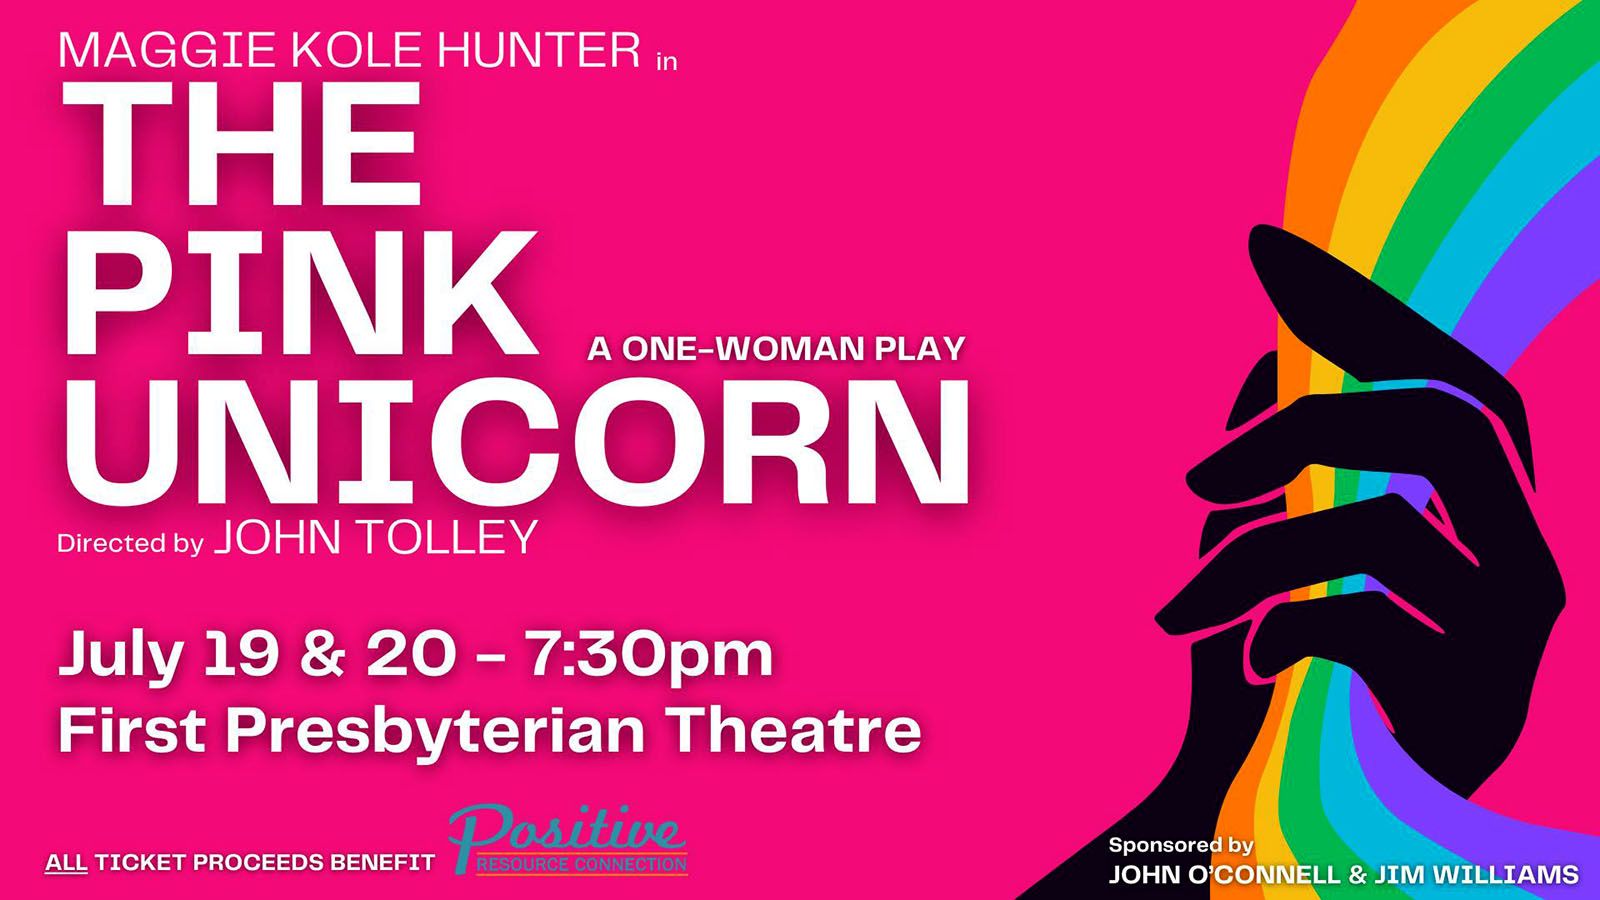 The one-woman show "The Pink Unicorn" will be put on Friday-Saturday, July 19-20, at First Presbyterian Theater.